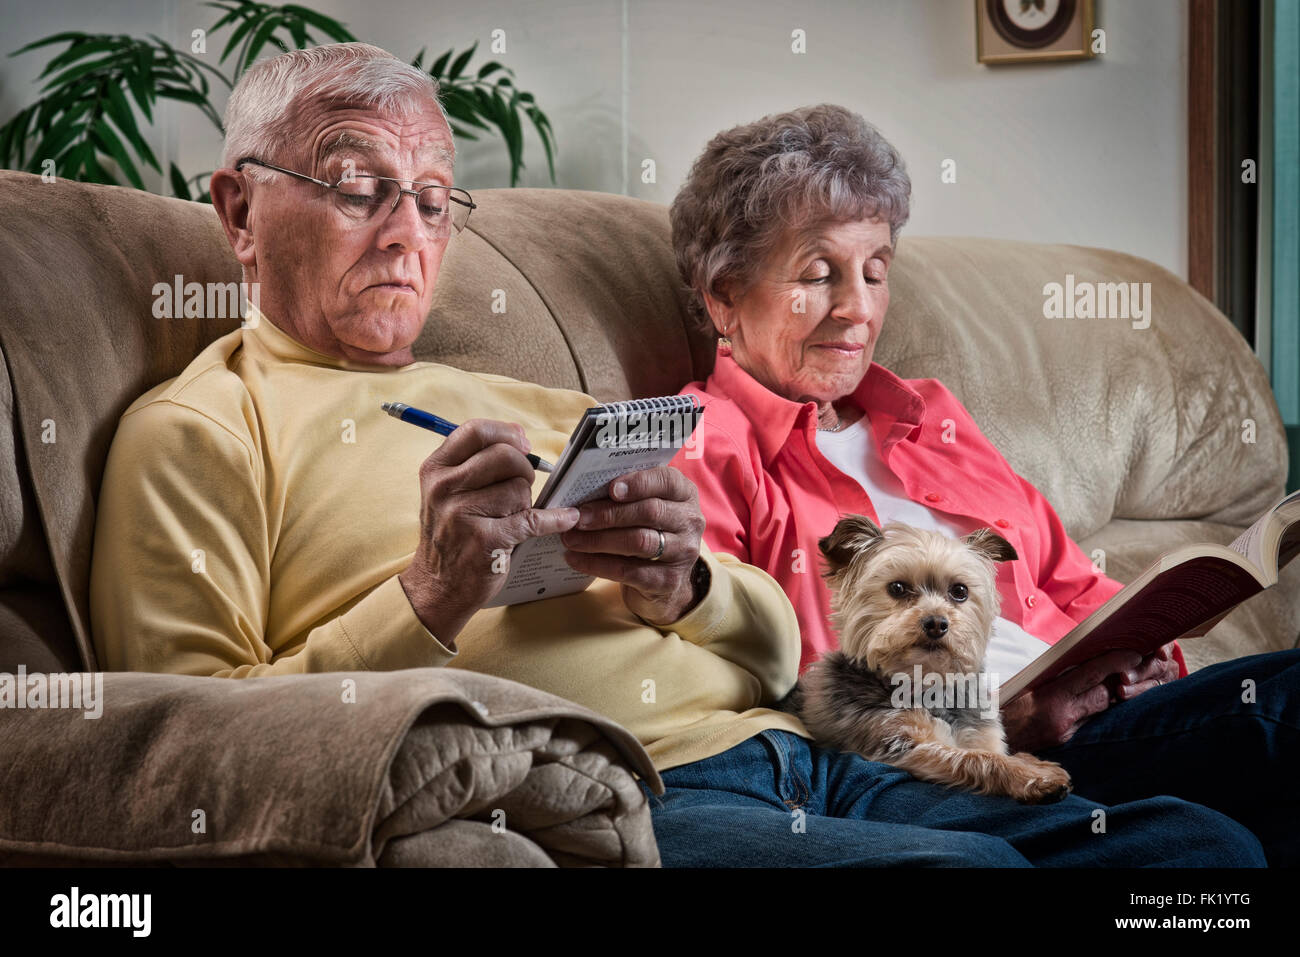 Illustrative version of an older couple relaxing together with their lap dog keeping them company. Stock Photo